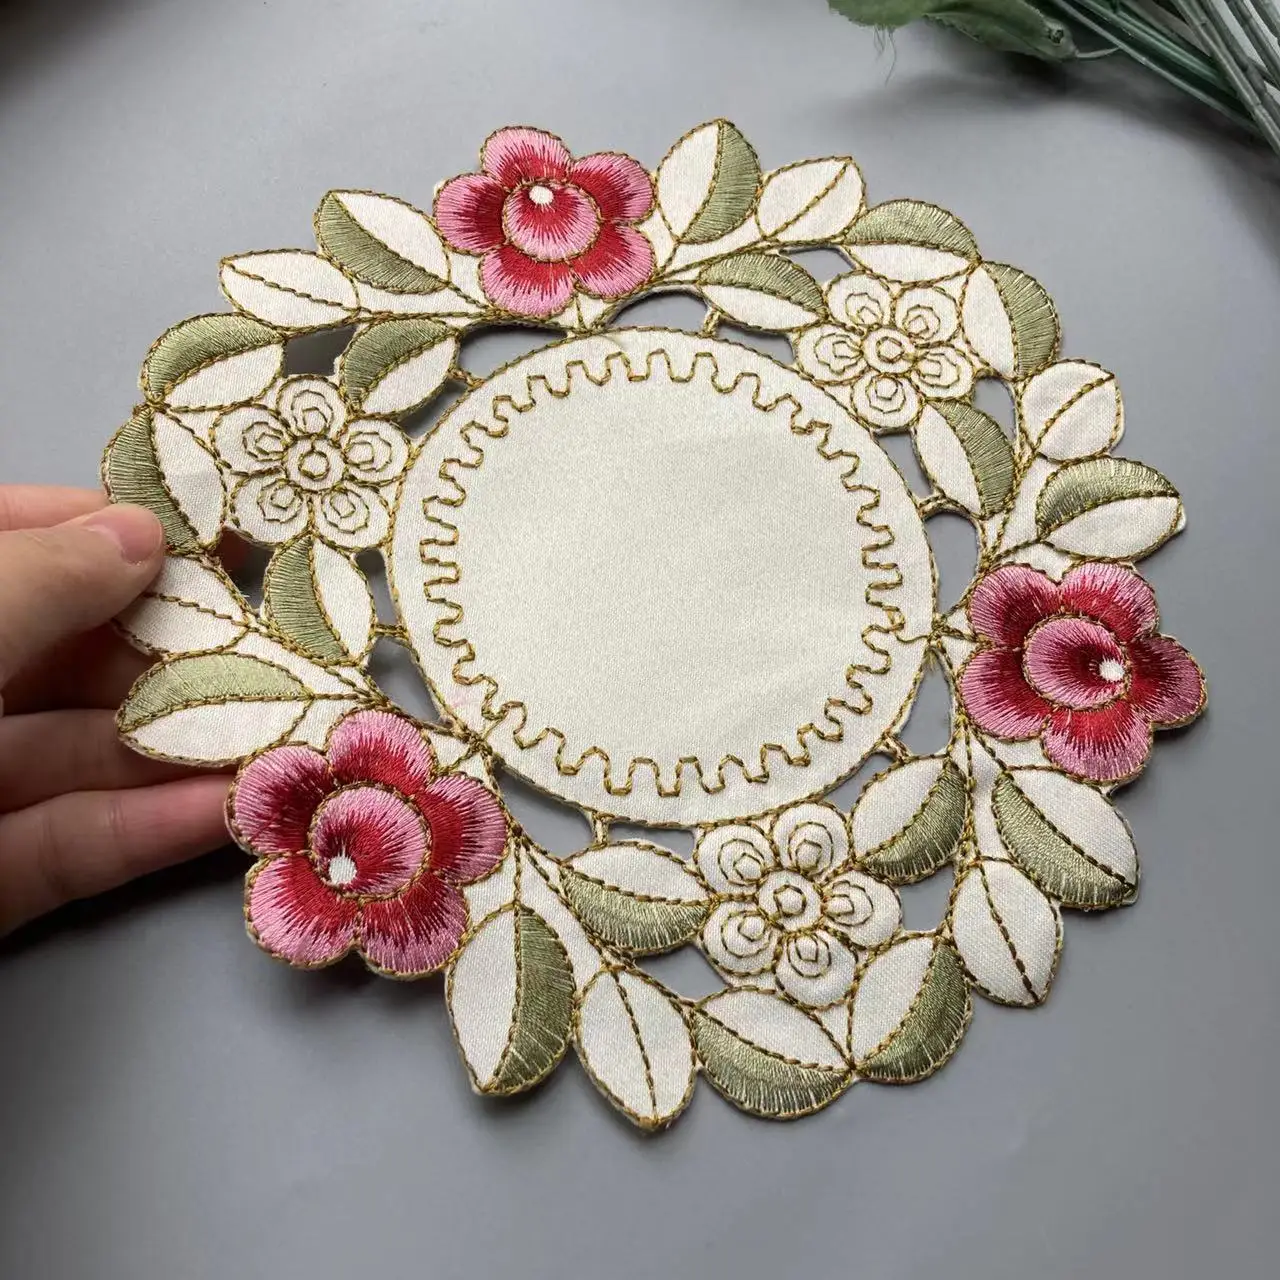 

20cm Round Cotton Place Table Mat Embroidery Cup Doily Tea Pad Cloth Dining Coaster Mug Tablecloth Placemat Kitchen Easter Decor